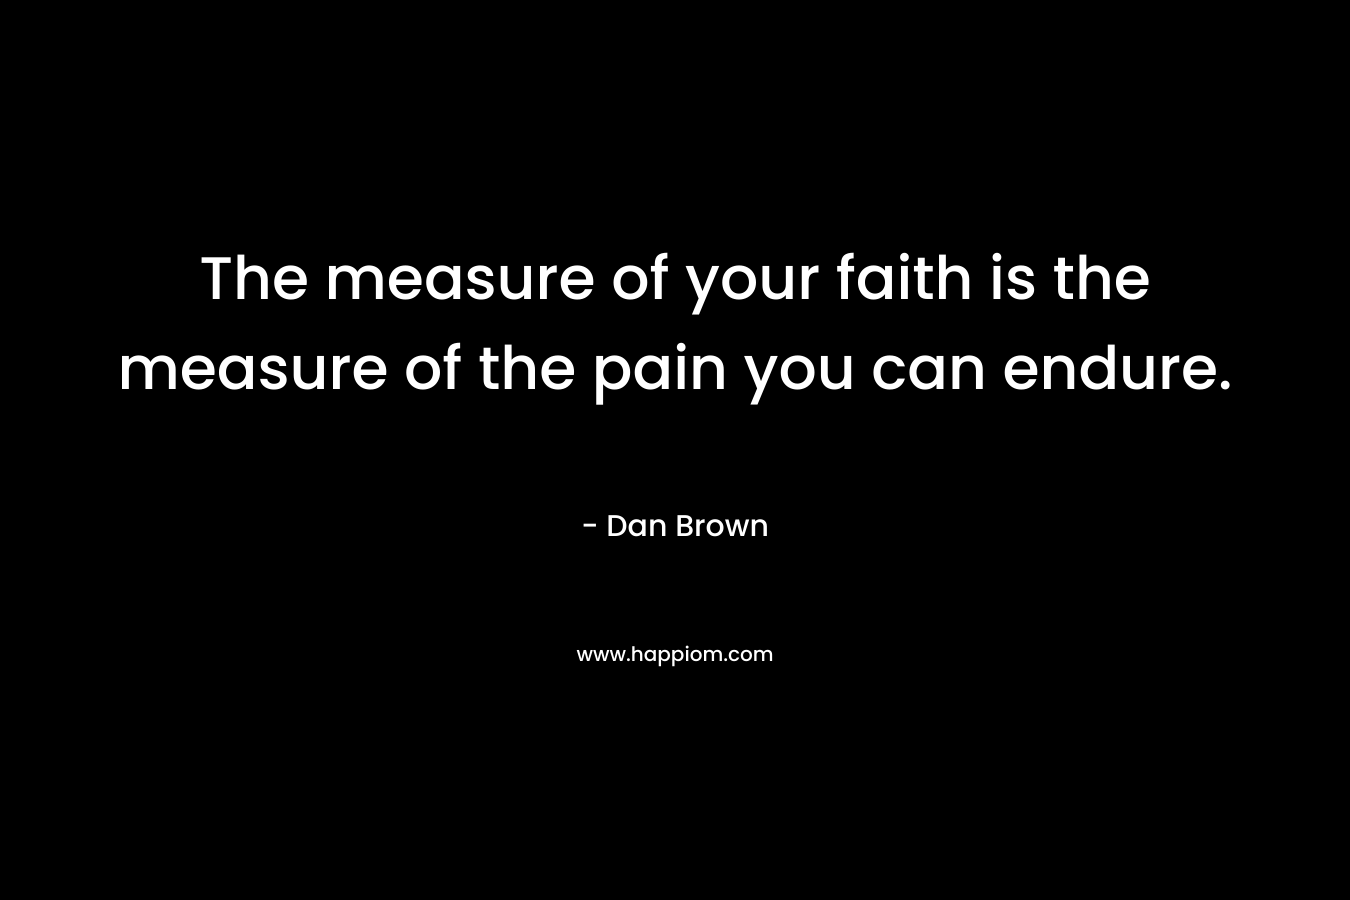 The measure of your faith is the measure of the pain you can endure.